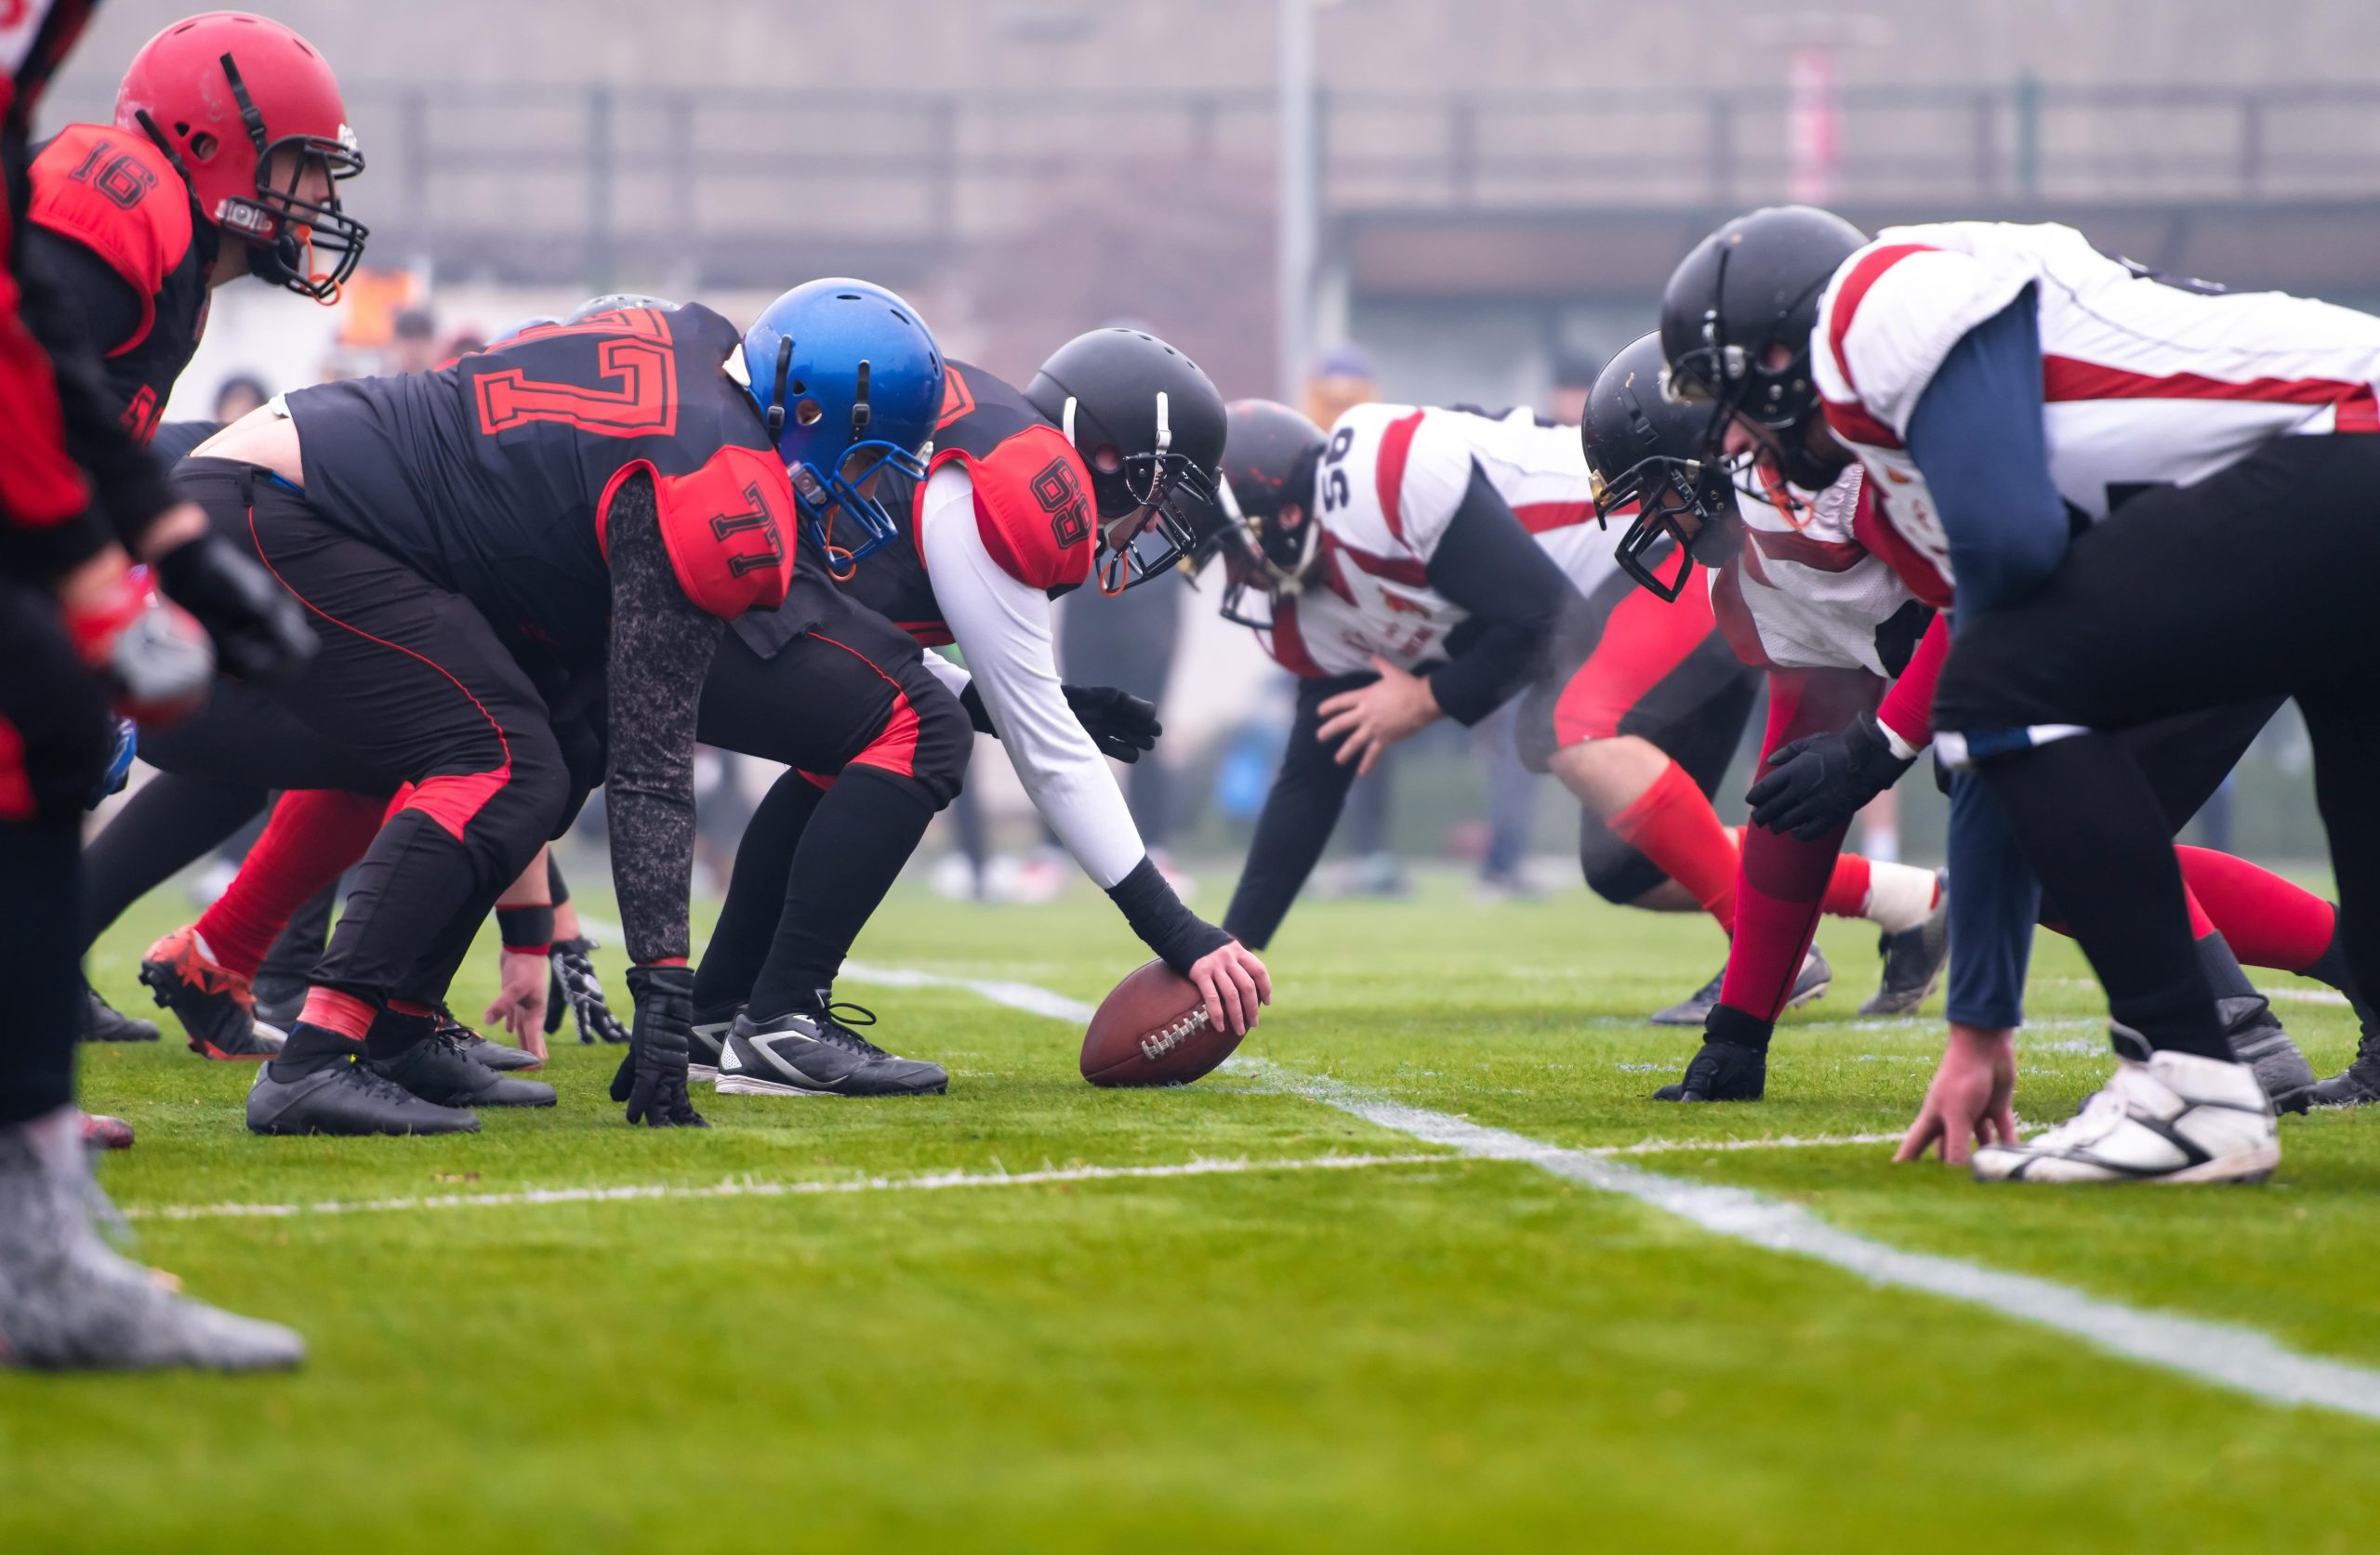 Back and Neck Injuries in Football: What You Need to Know